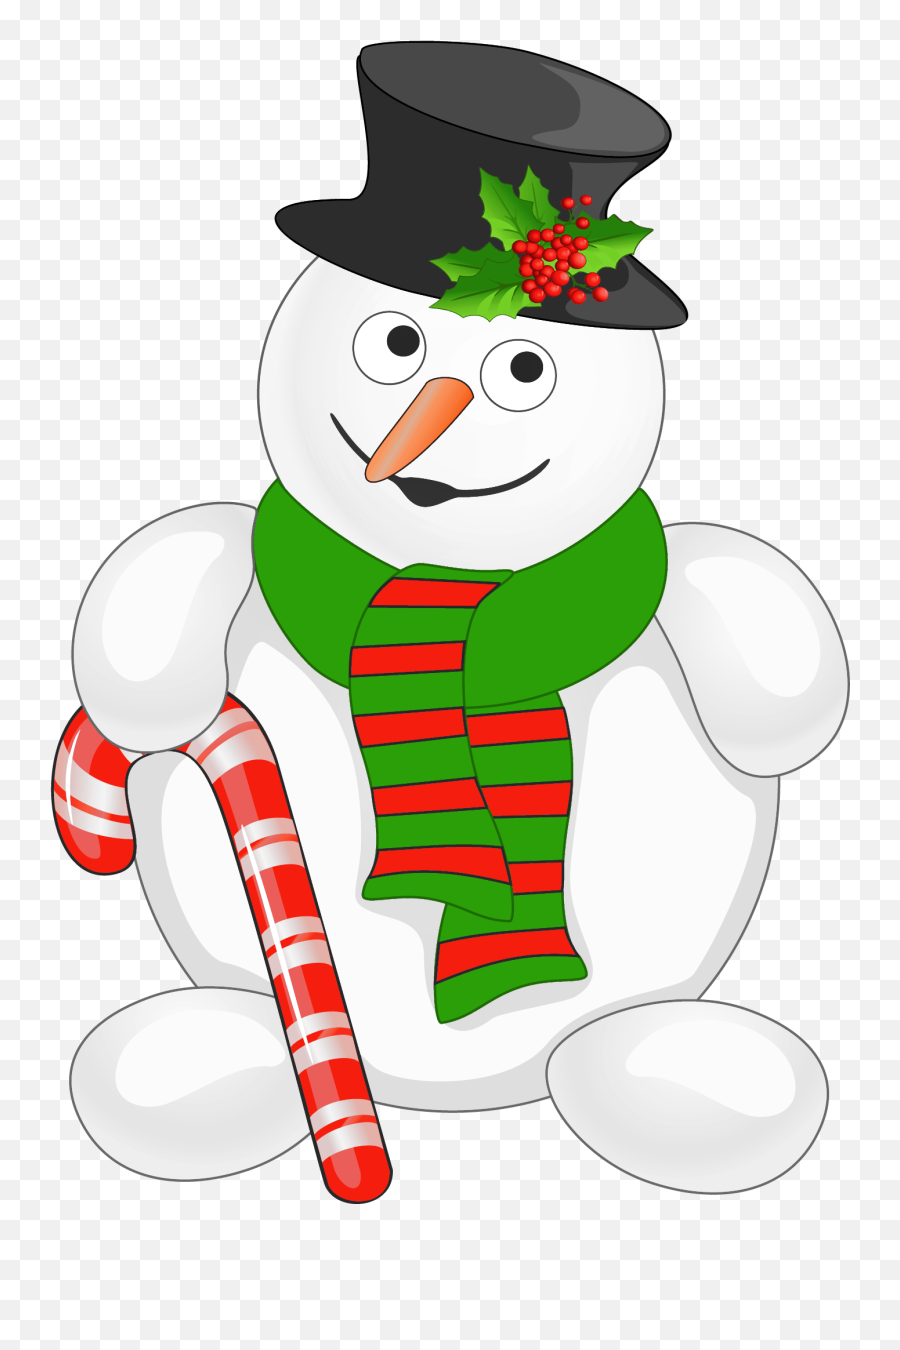 Free Snowman Pics Download Free Clip - Snowman With Candy Cane Emoji,Snowman Emoticons